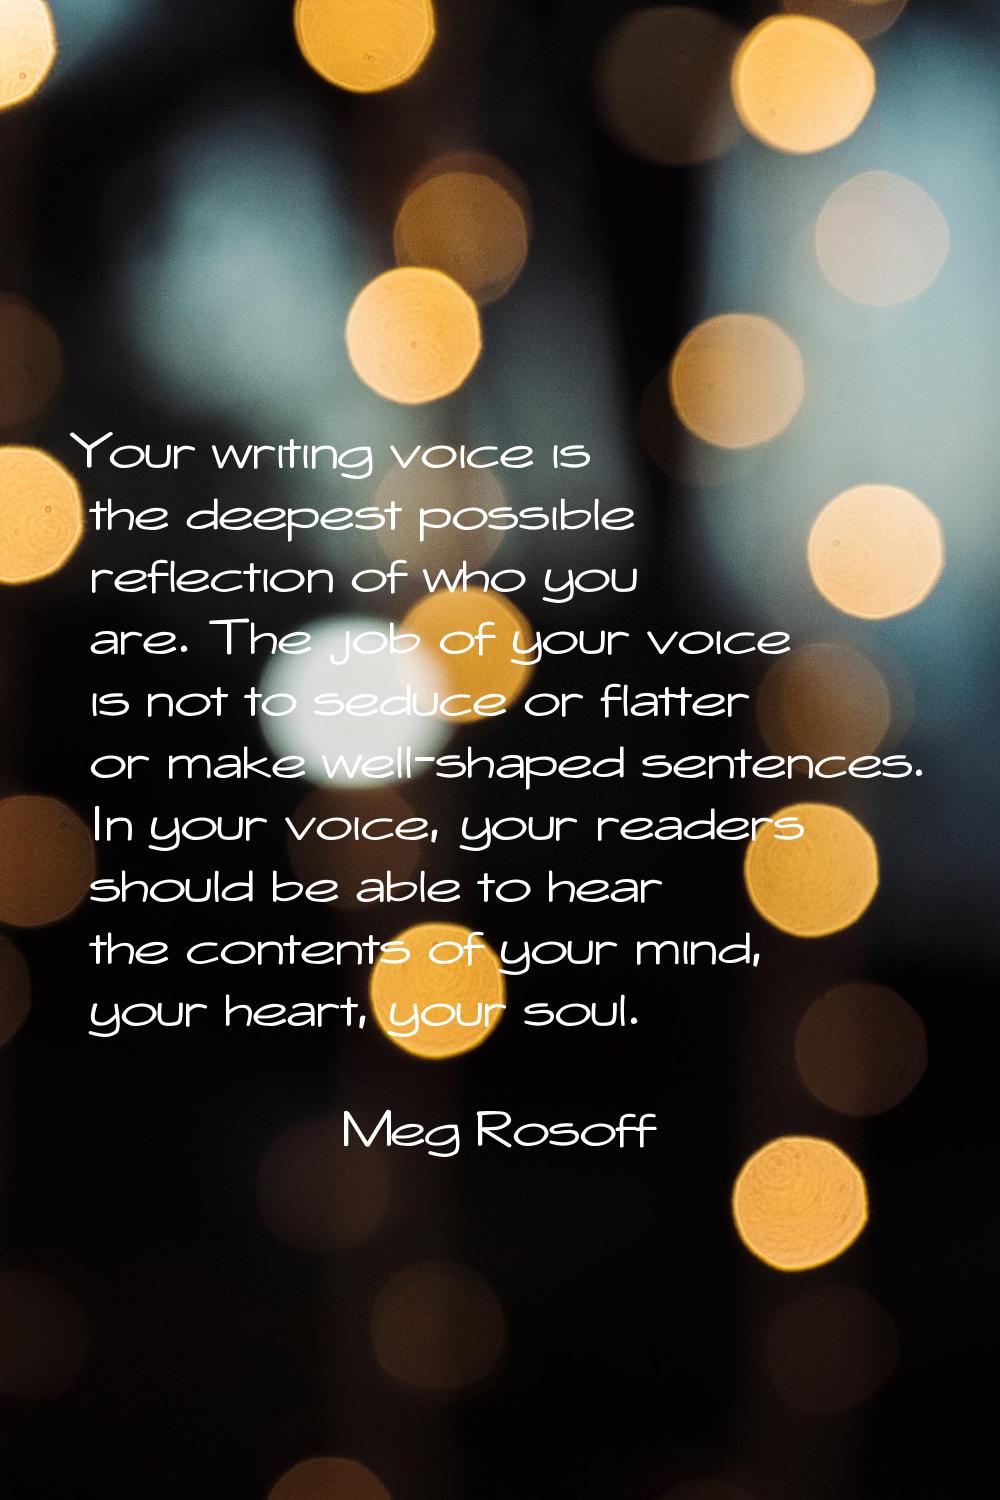 Your writing voice is the deepest possible reflection of who you are. The job of your voice is not 